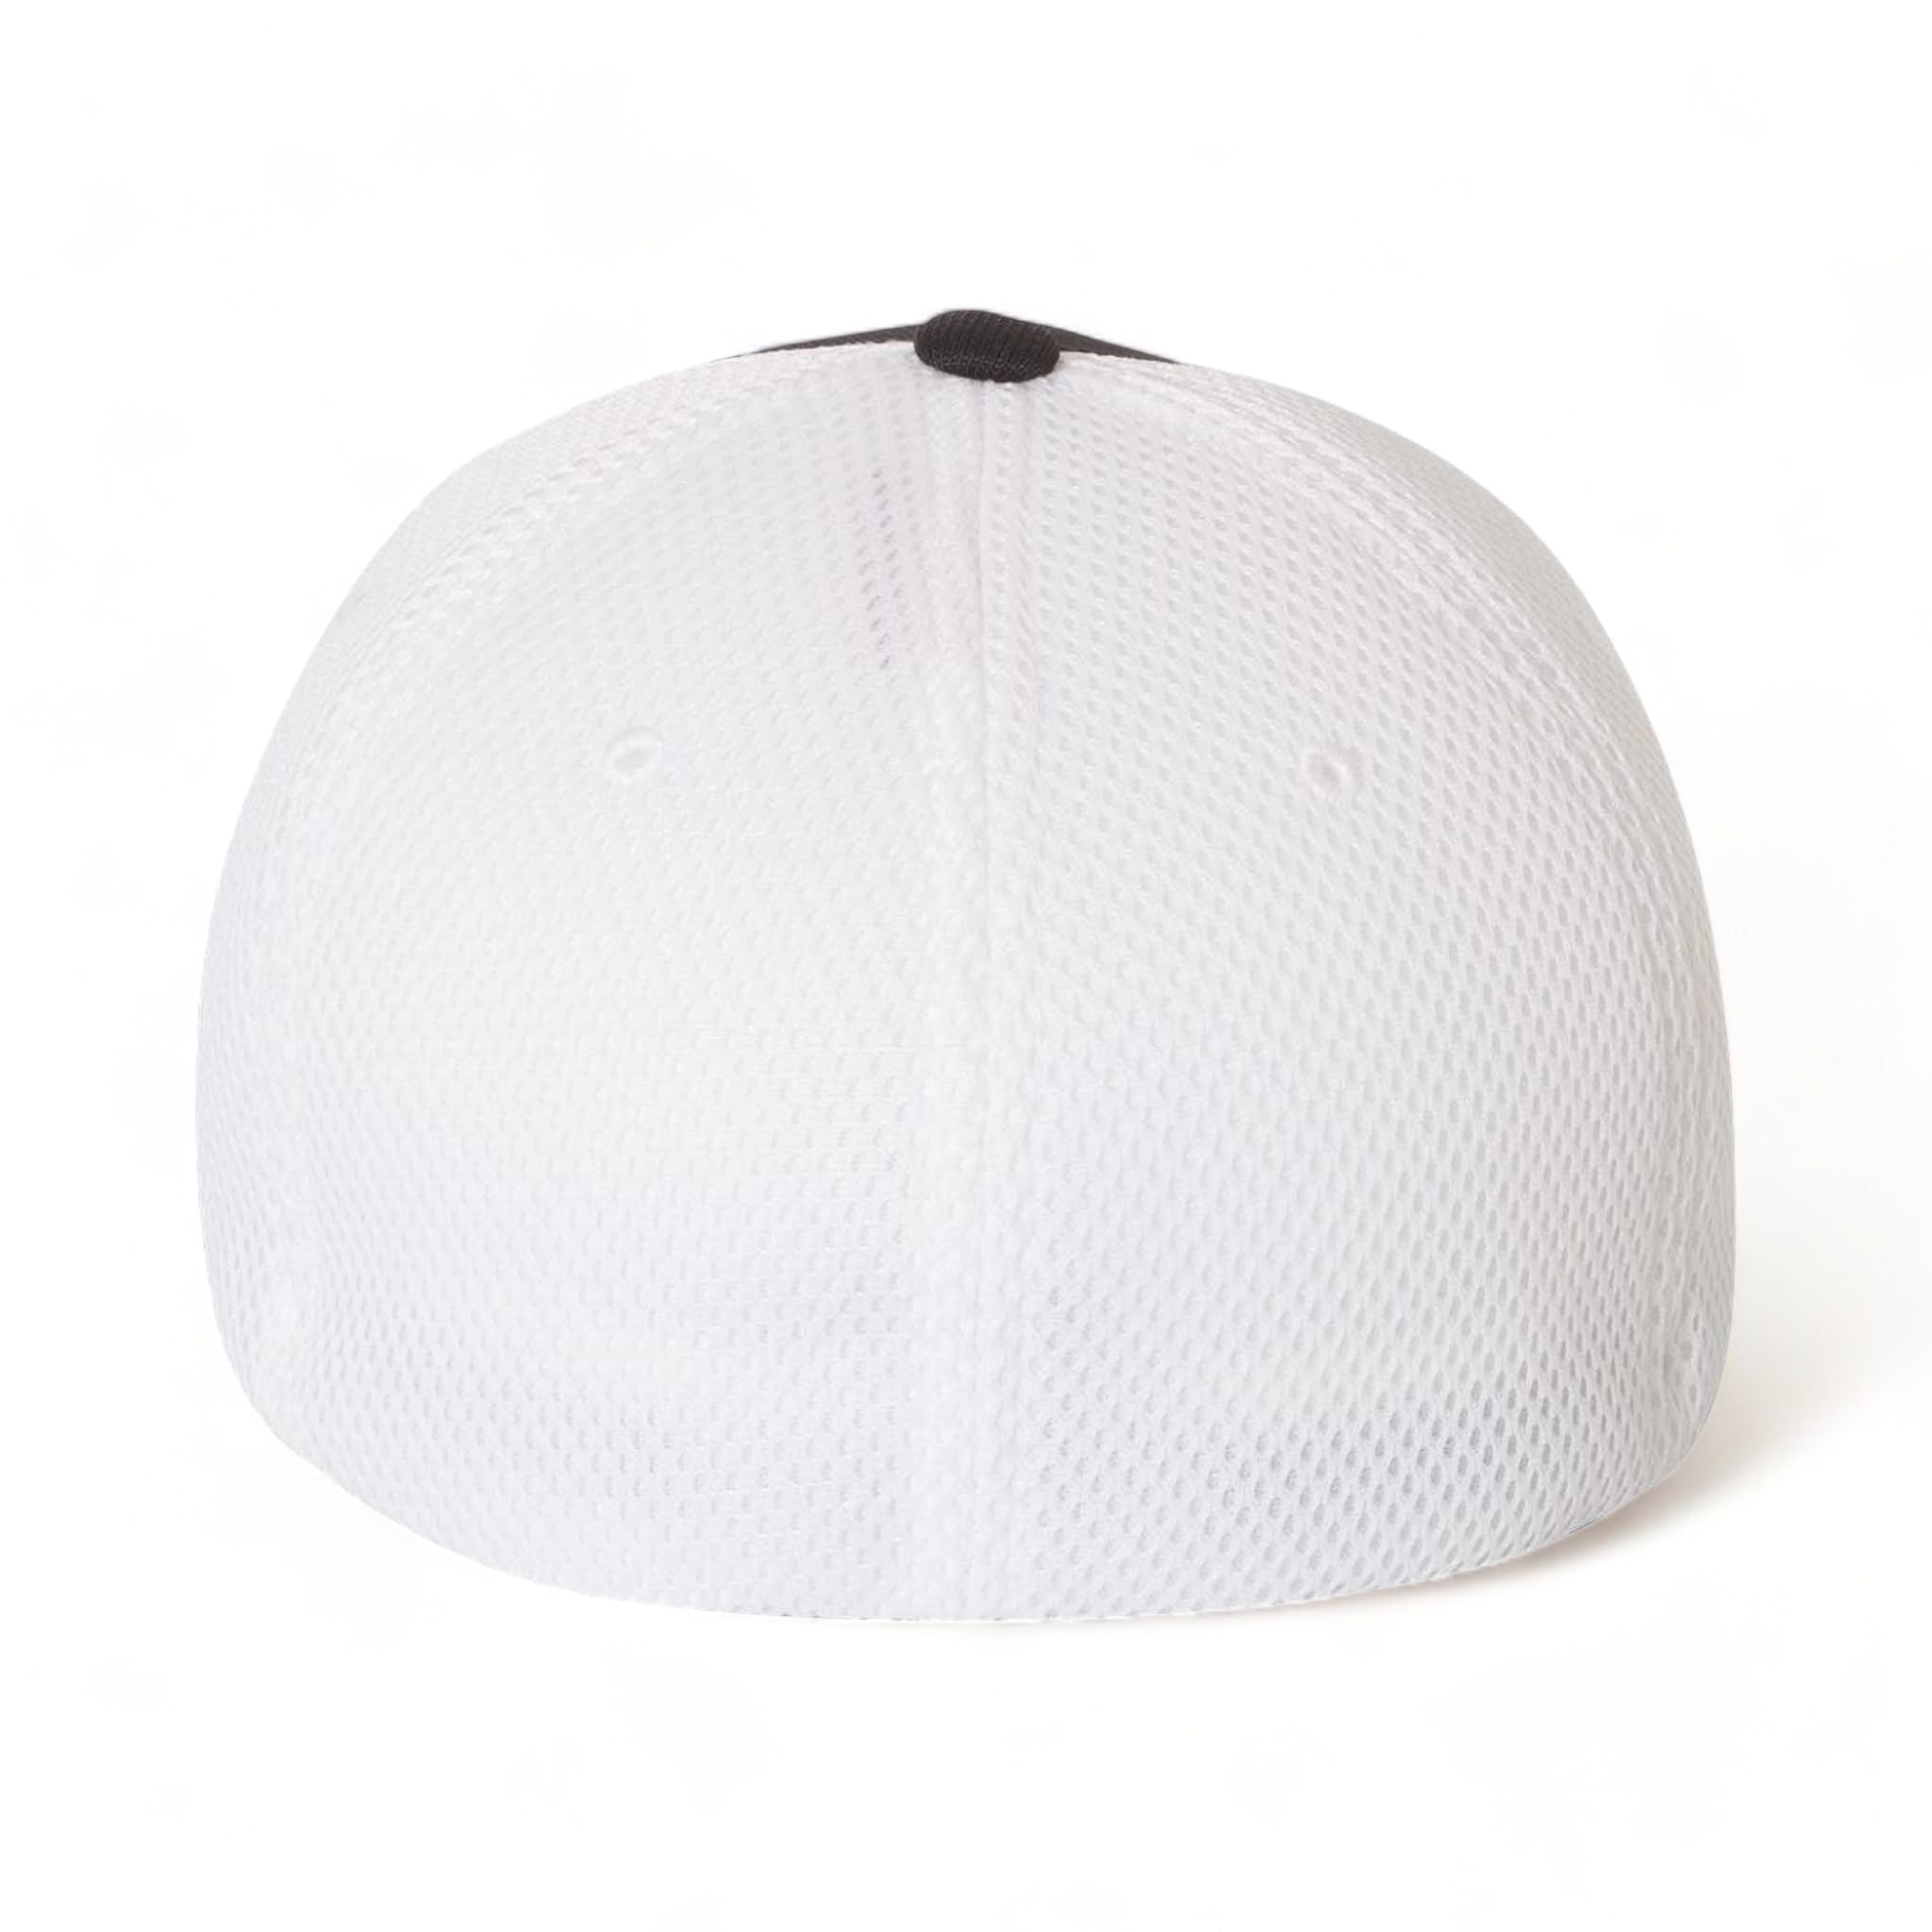 Back view of Flexfit 6533 custom hat in black and white